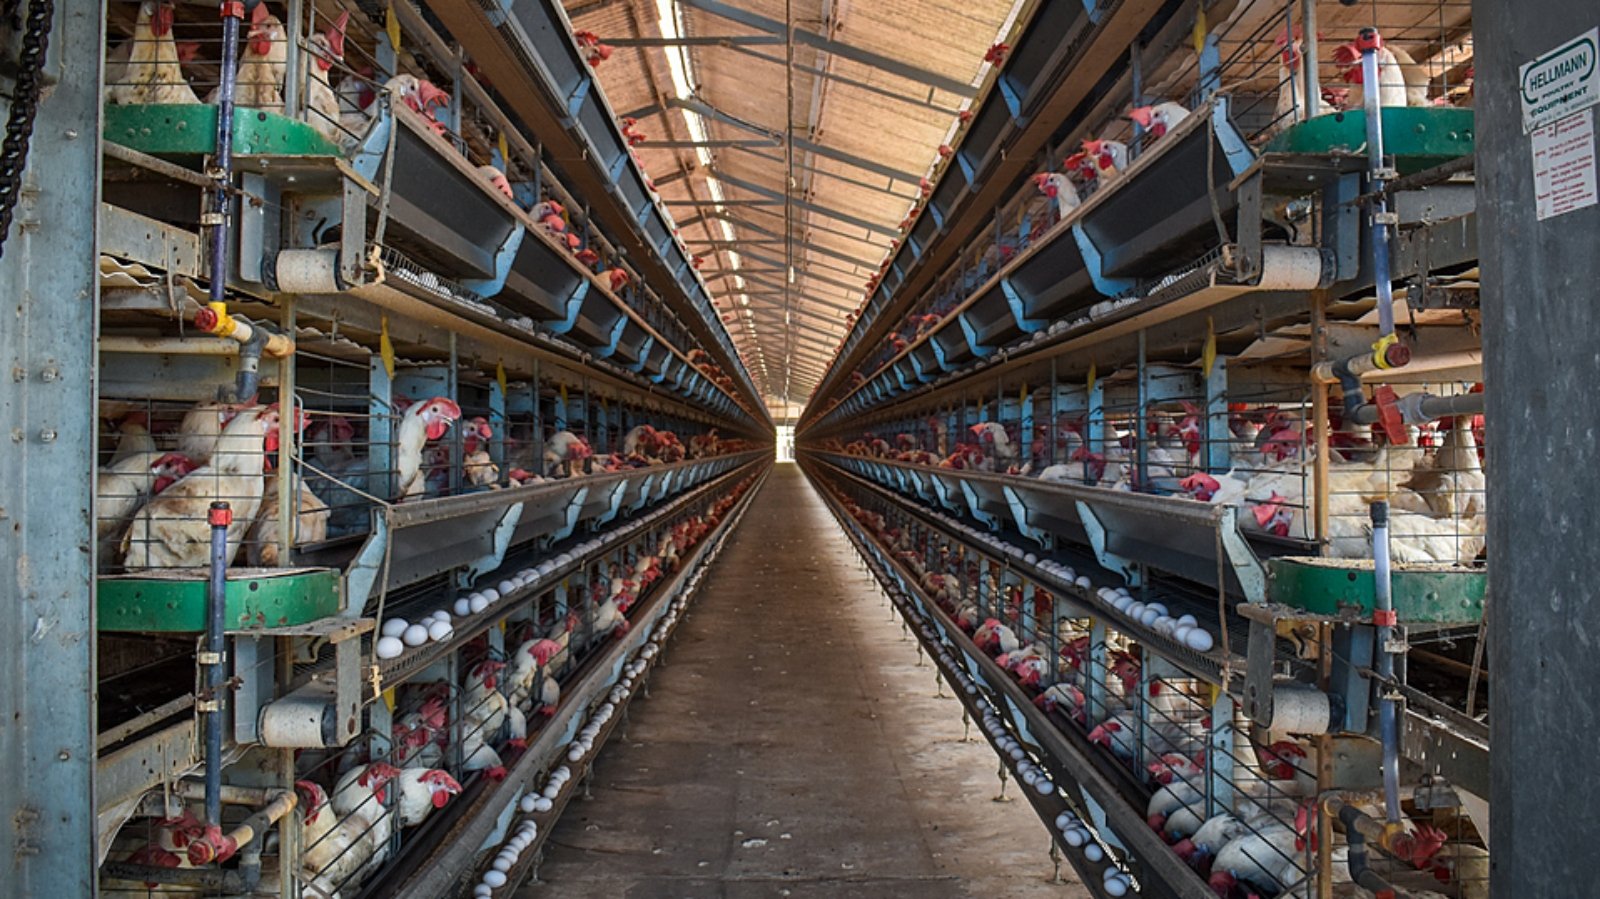 Rows of hens in cages at a factory farm